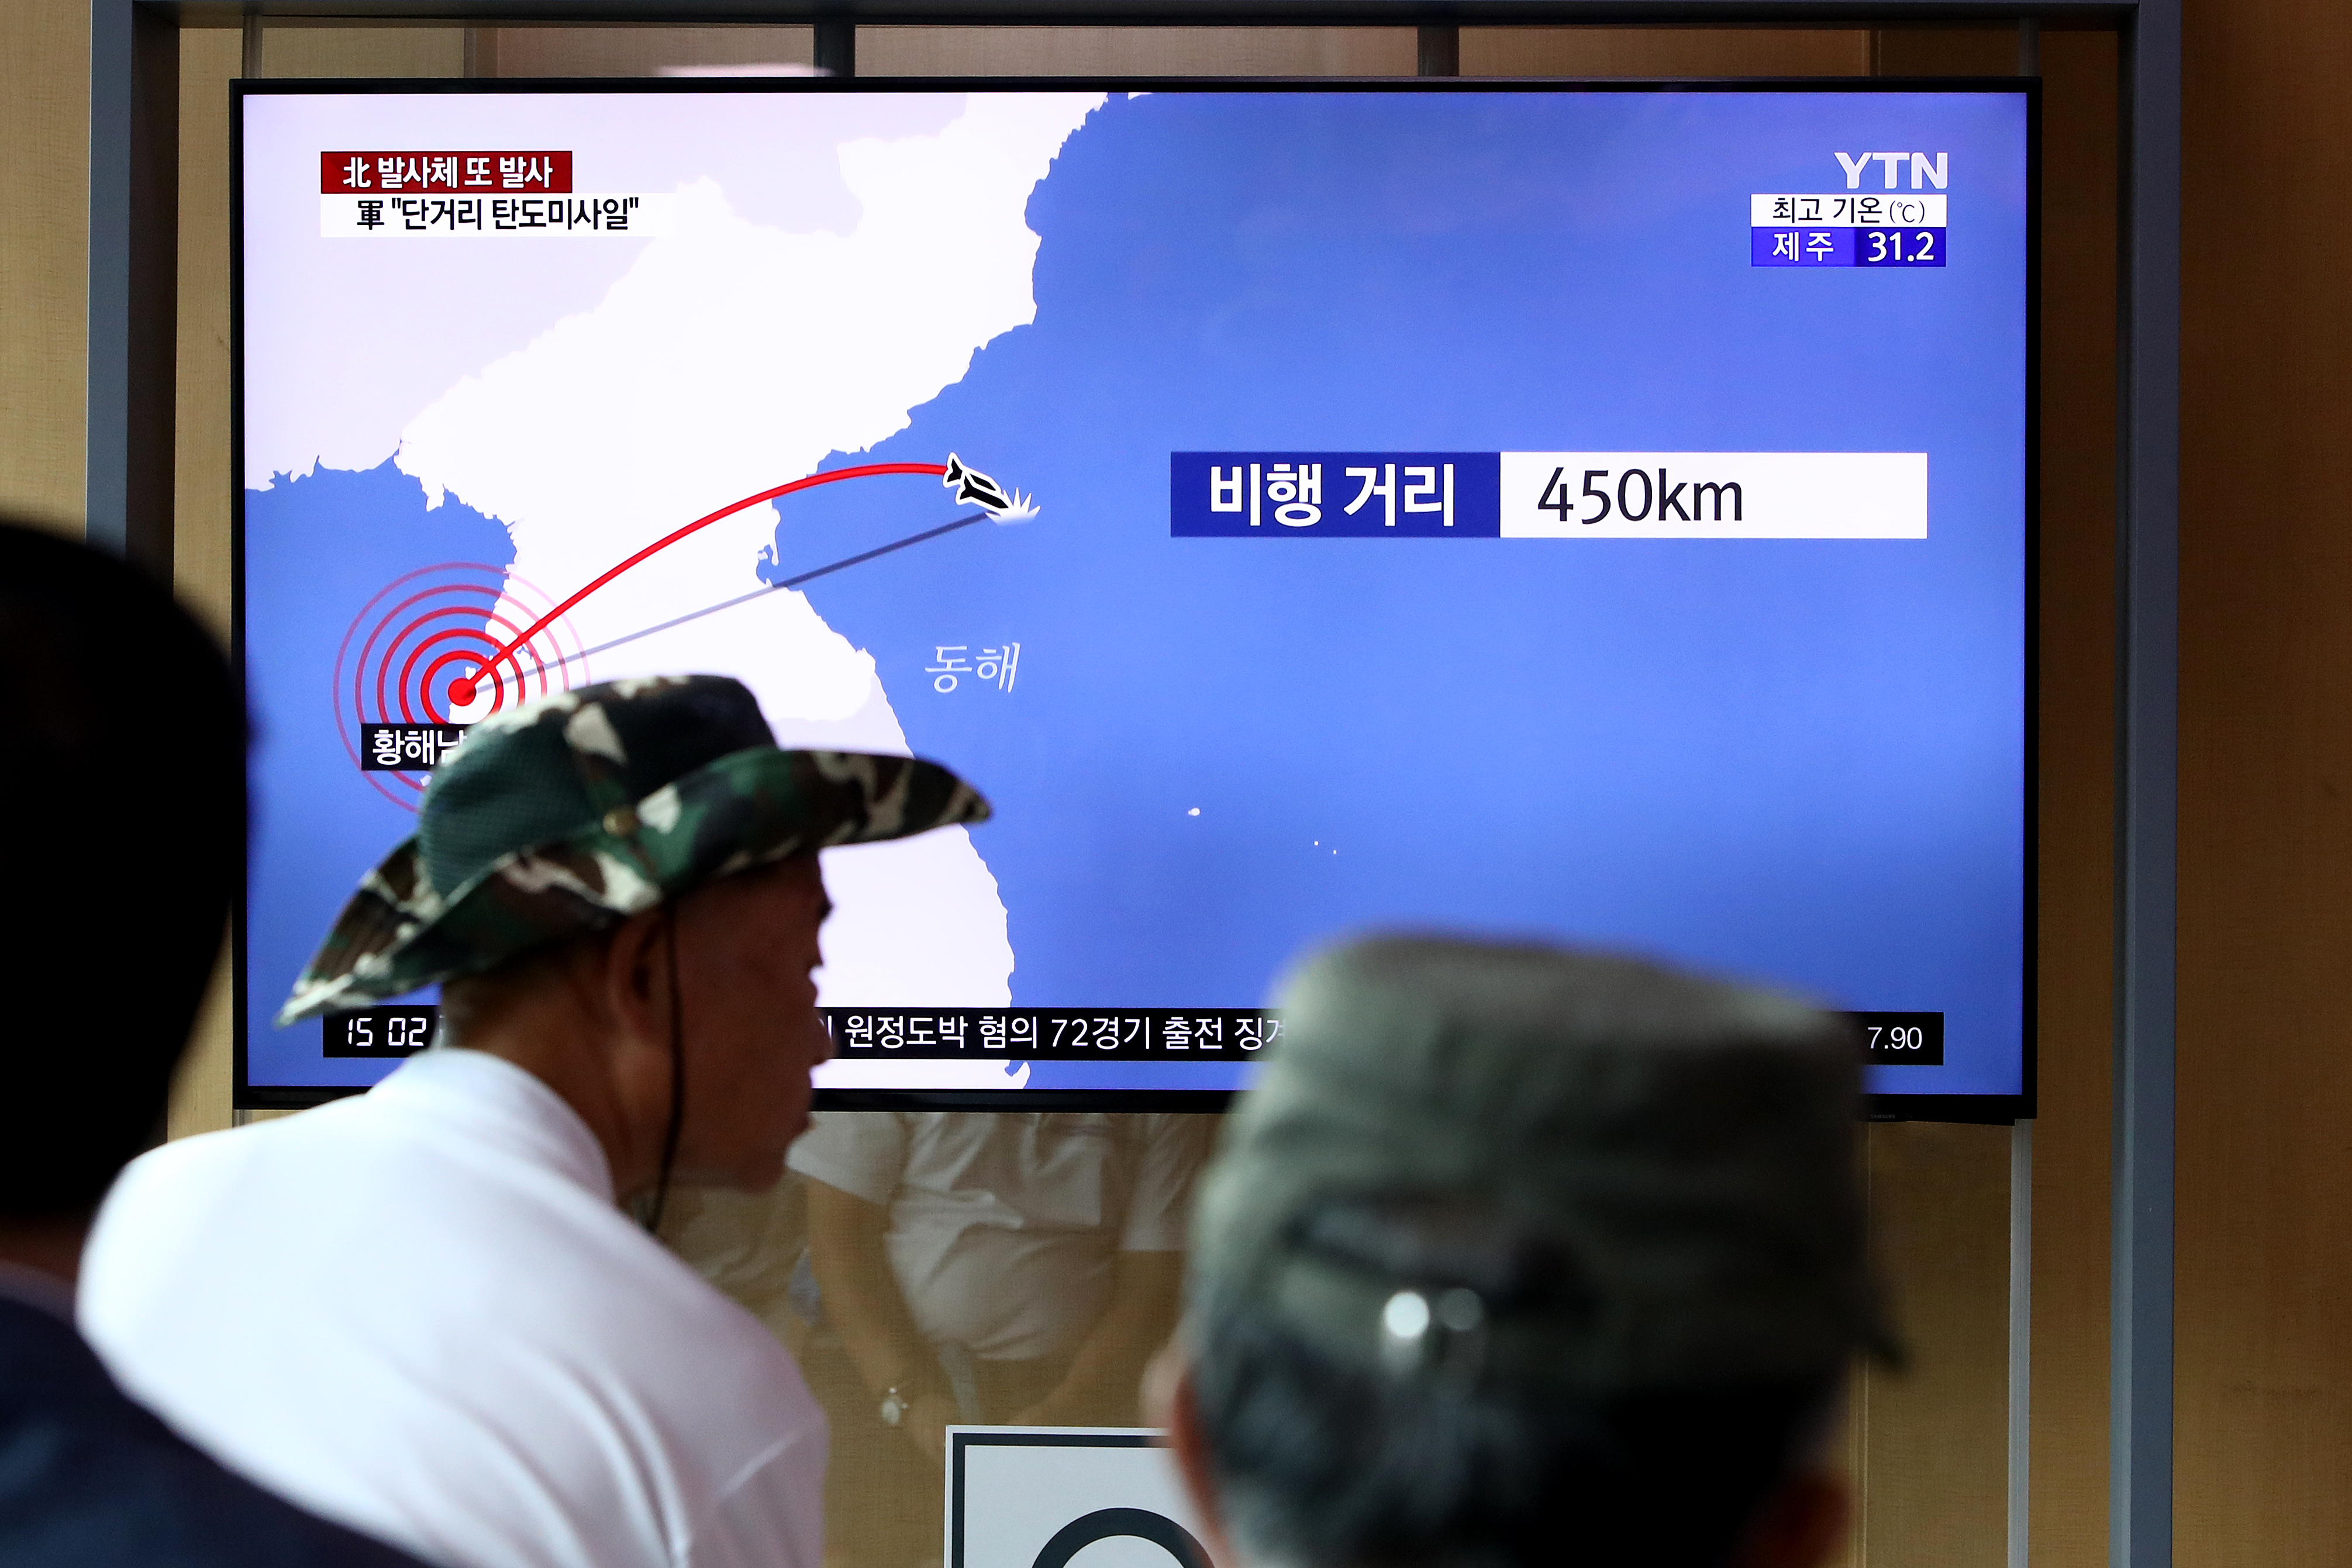 People watch a TV showing a file image of a North Korea's missile launch at the Seoul Railway Station on August 06, 2019. (Photo by Chung Sung-Jun/Getty Images)